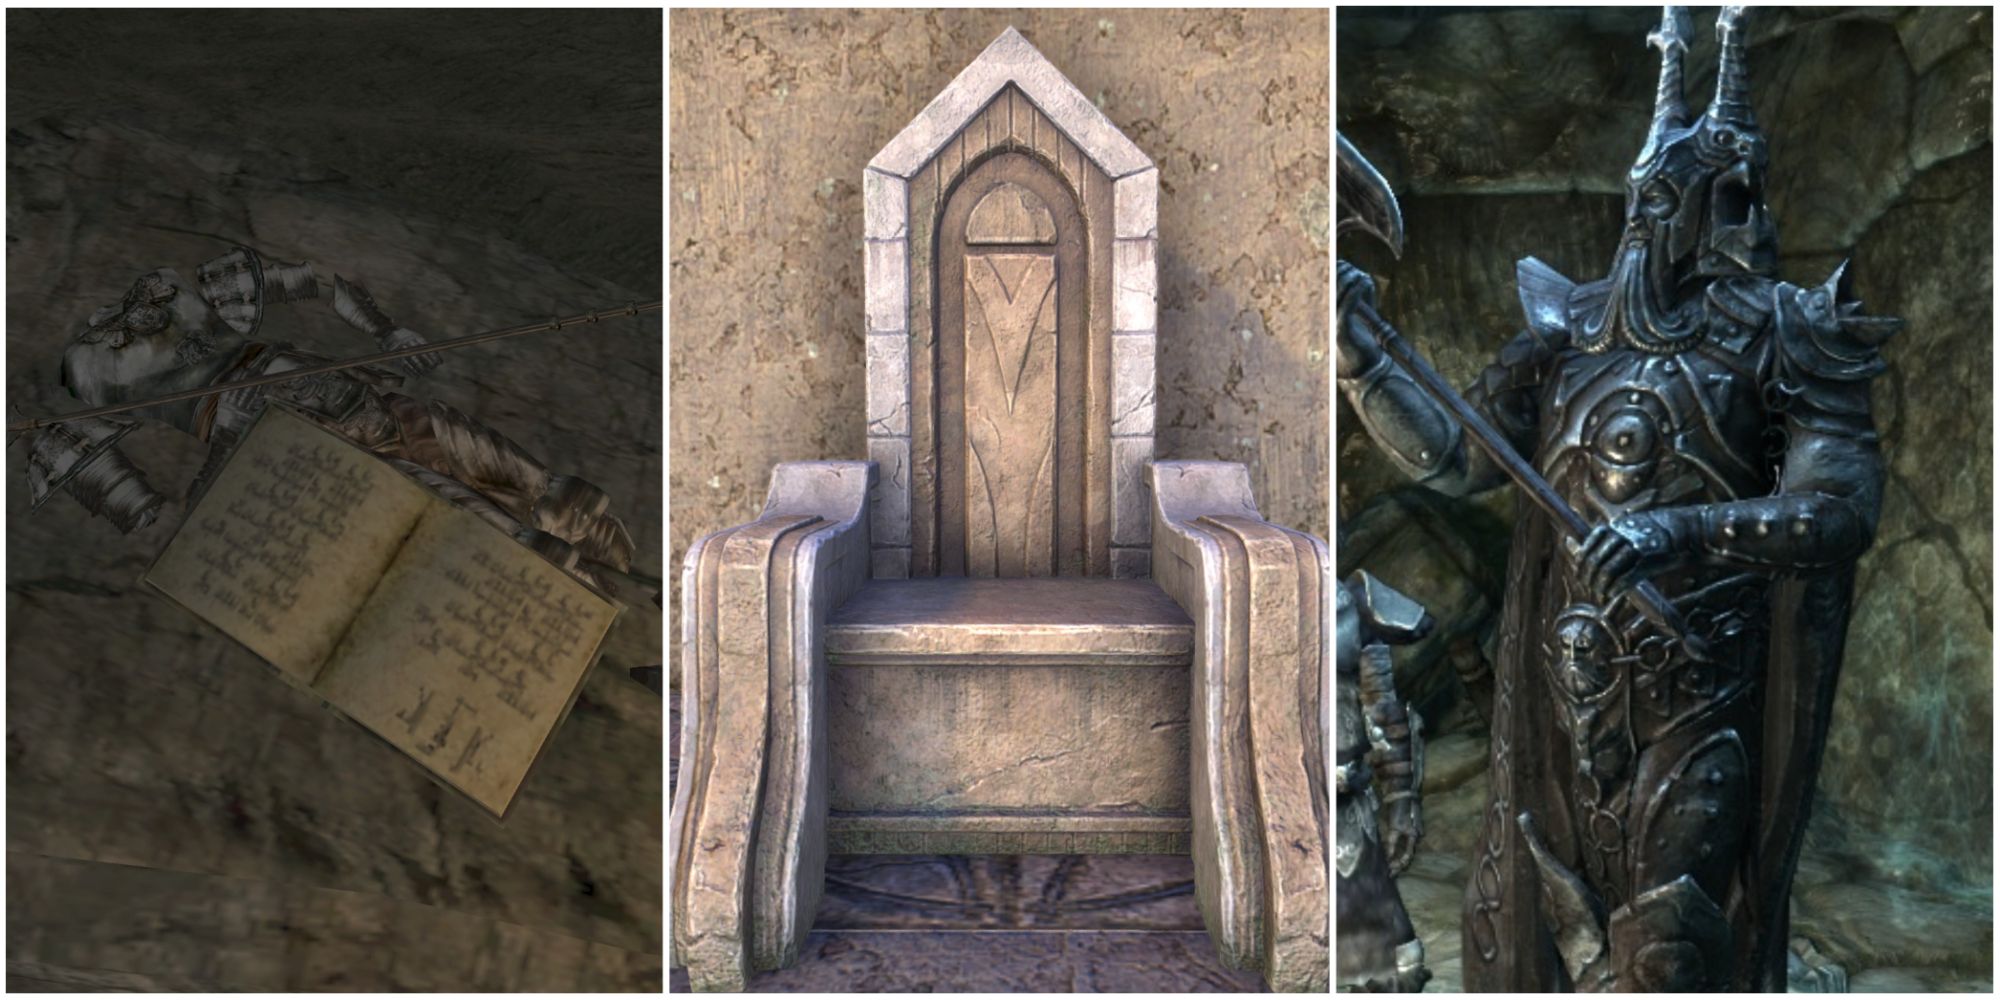 The Elder Scrolls Snow Prince Remains, Snow Prince Throne, and a Statue of Ysgramor